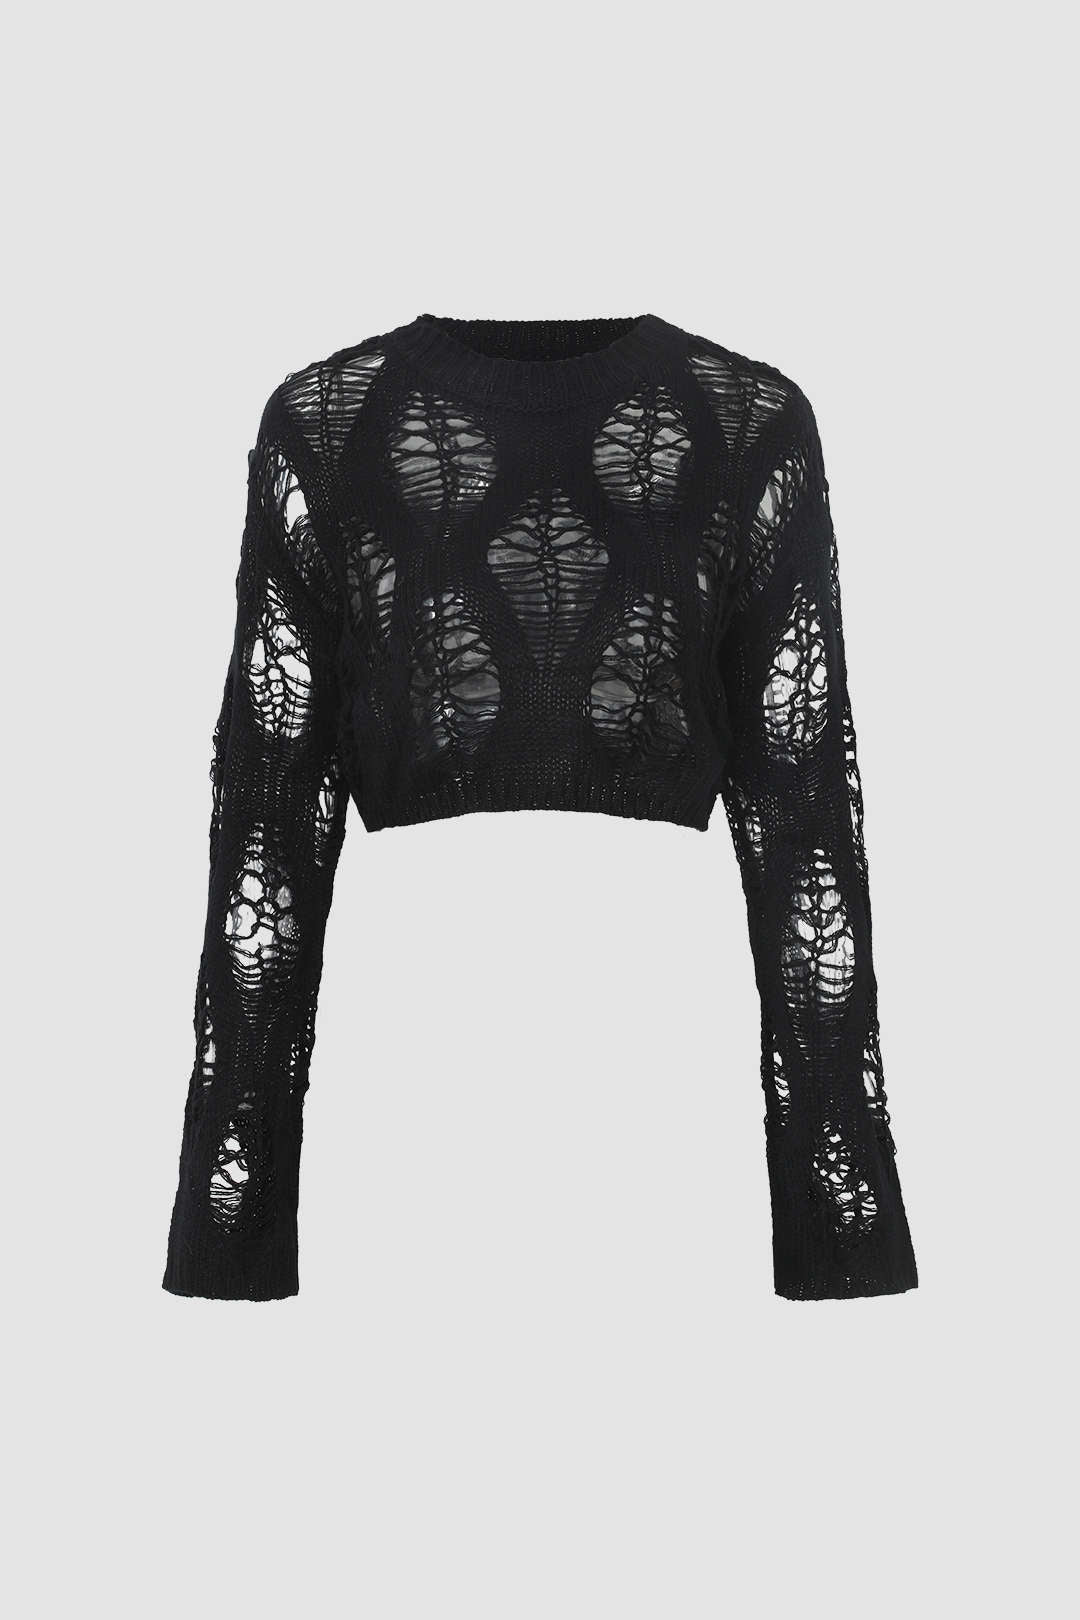 Destroyed Cut-Out Long Sleeve Knit Top